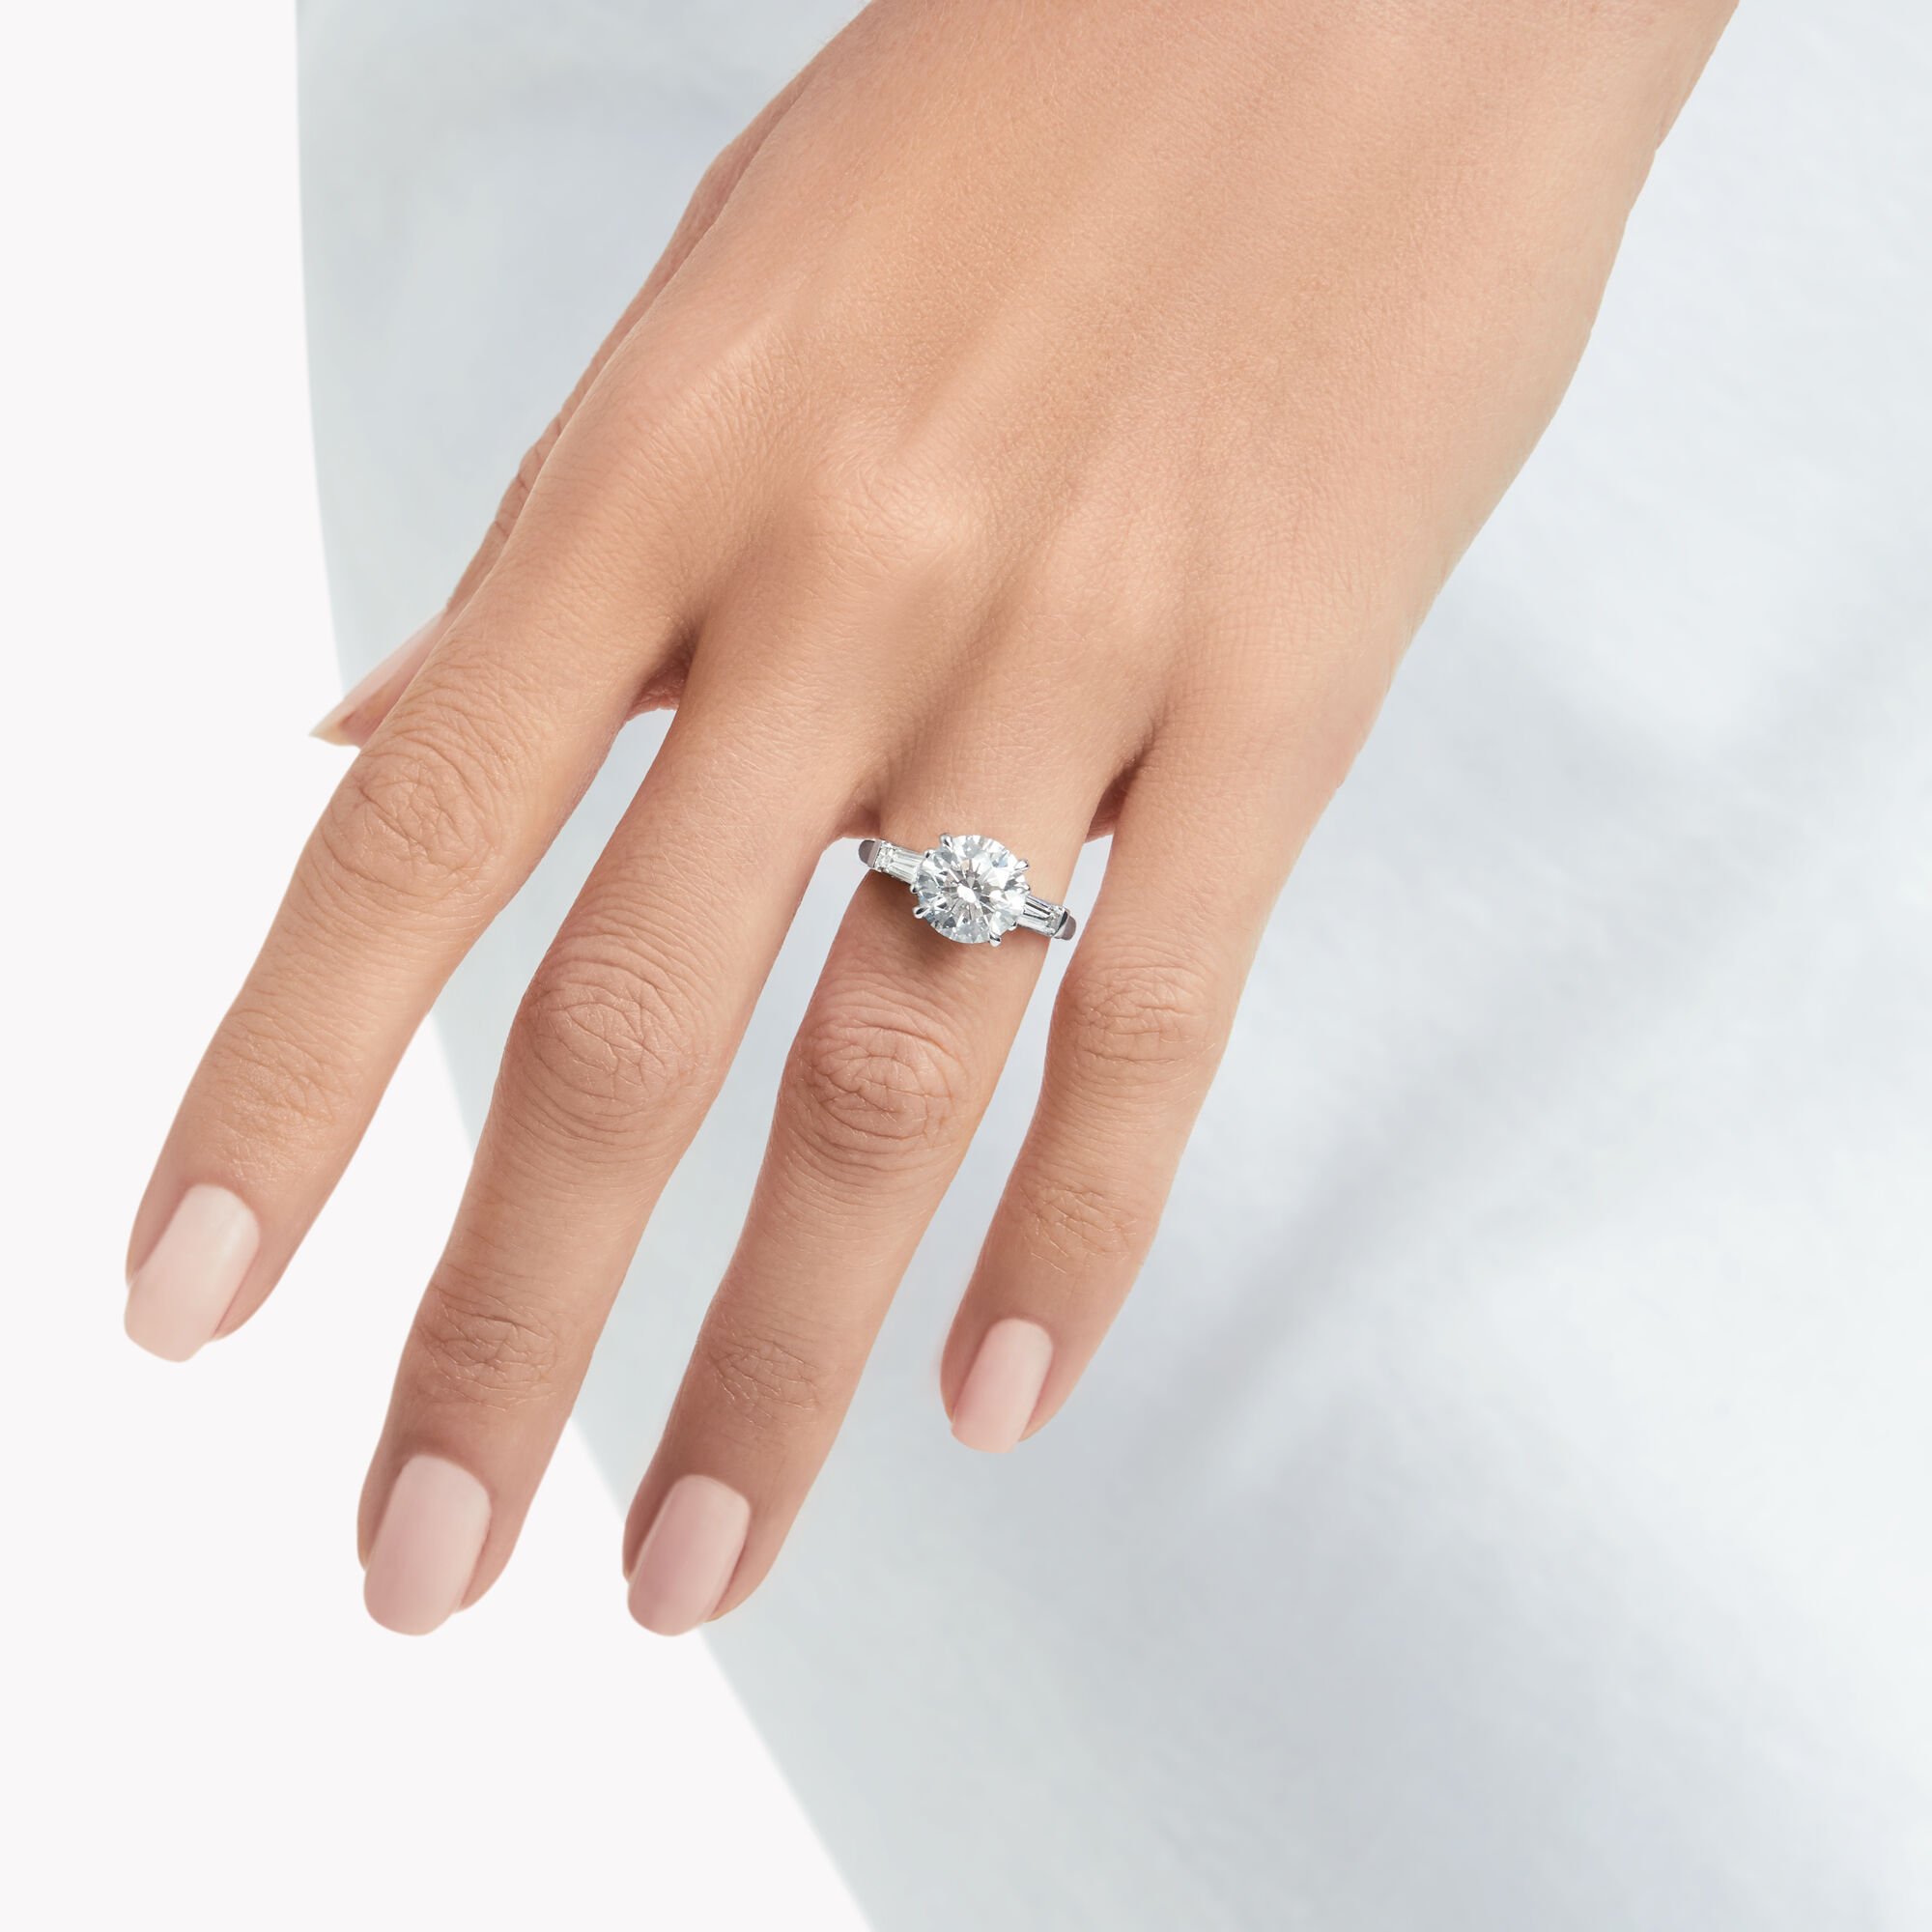 Model wears Promise Round Diamond Engagement Ring with baguette side stones from the Graff Bridal collection